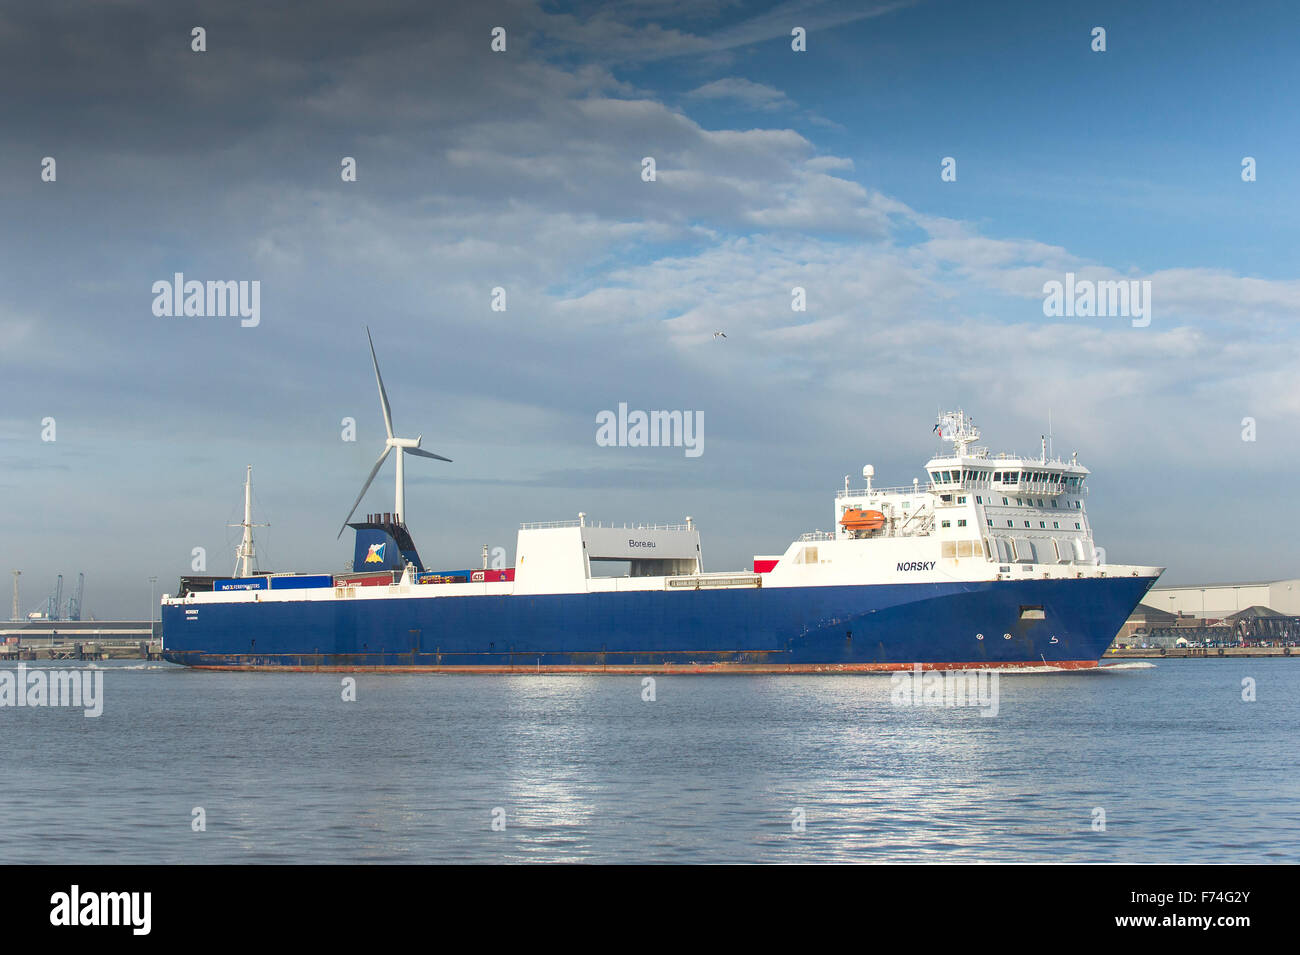 The Ro-Ro cargo ship, Norsky leaves the Port of Tilbury and steams